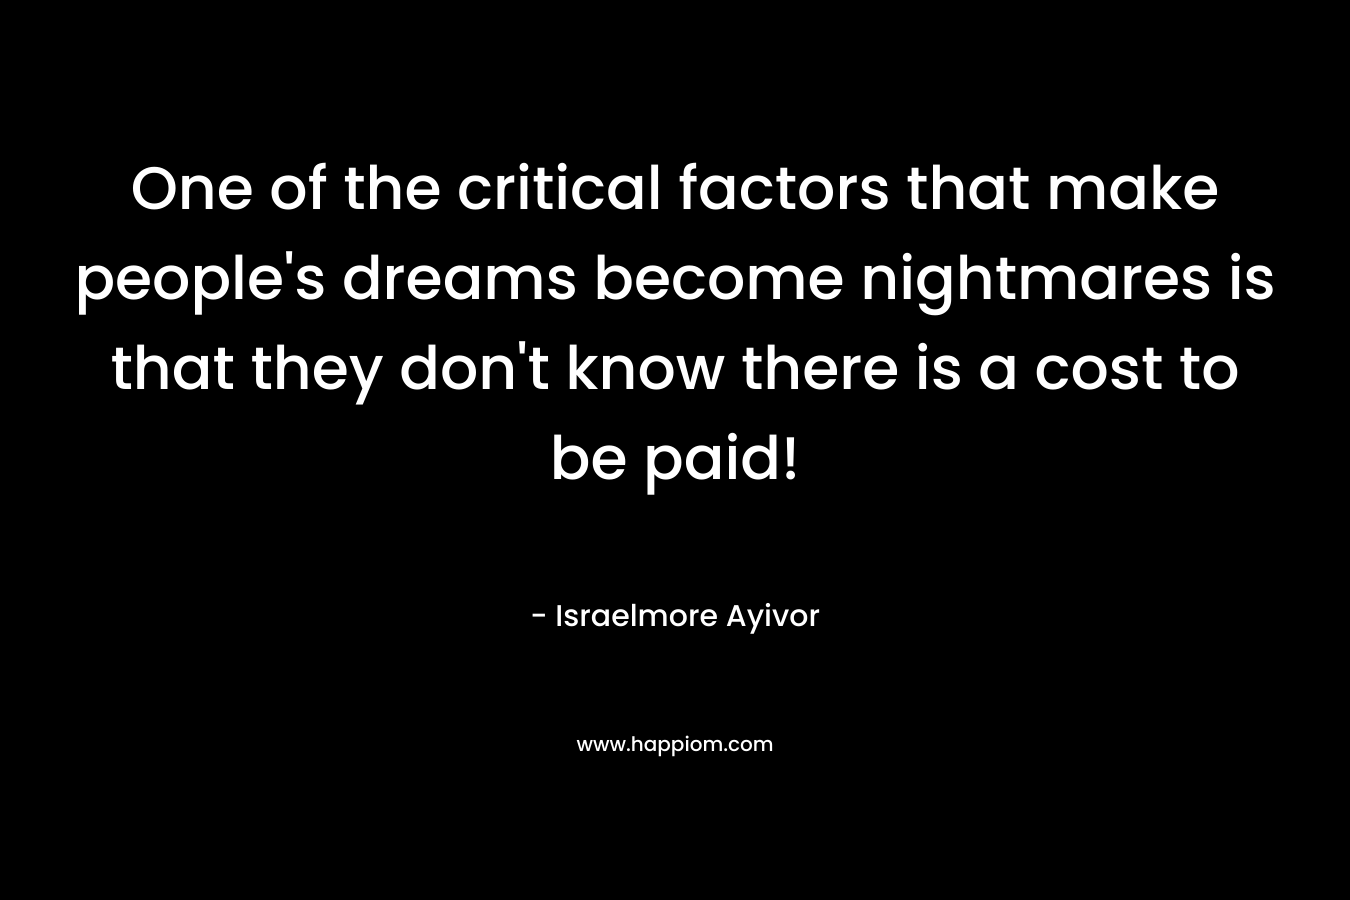 One of the critical factors that make people's dreams become nightmares is that they don't know there is a cost to be paid!